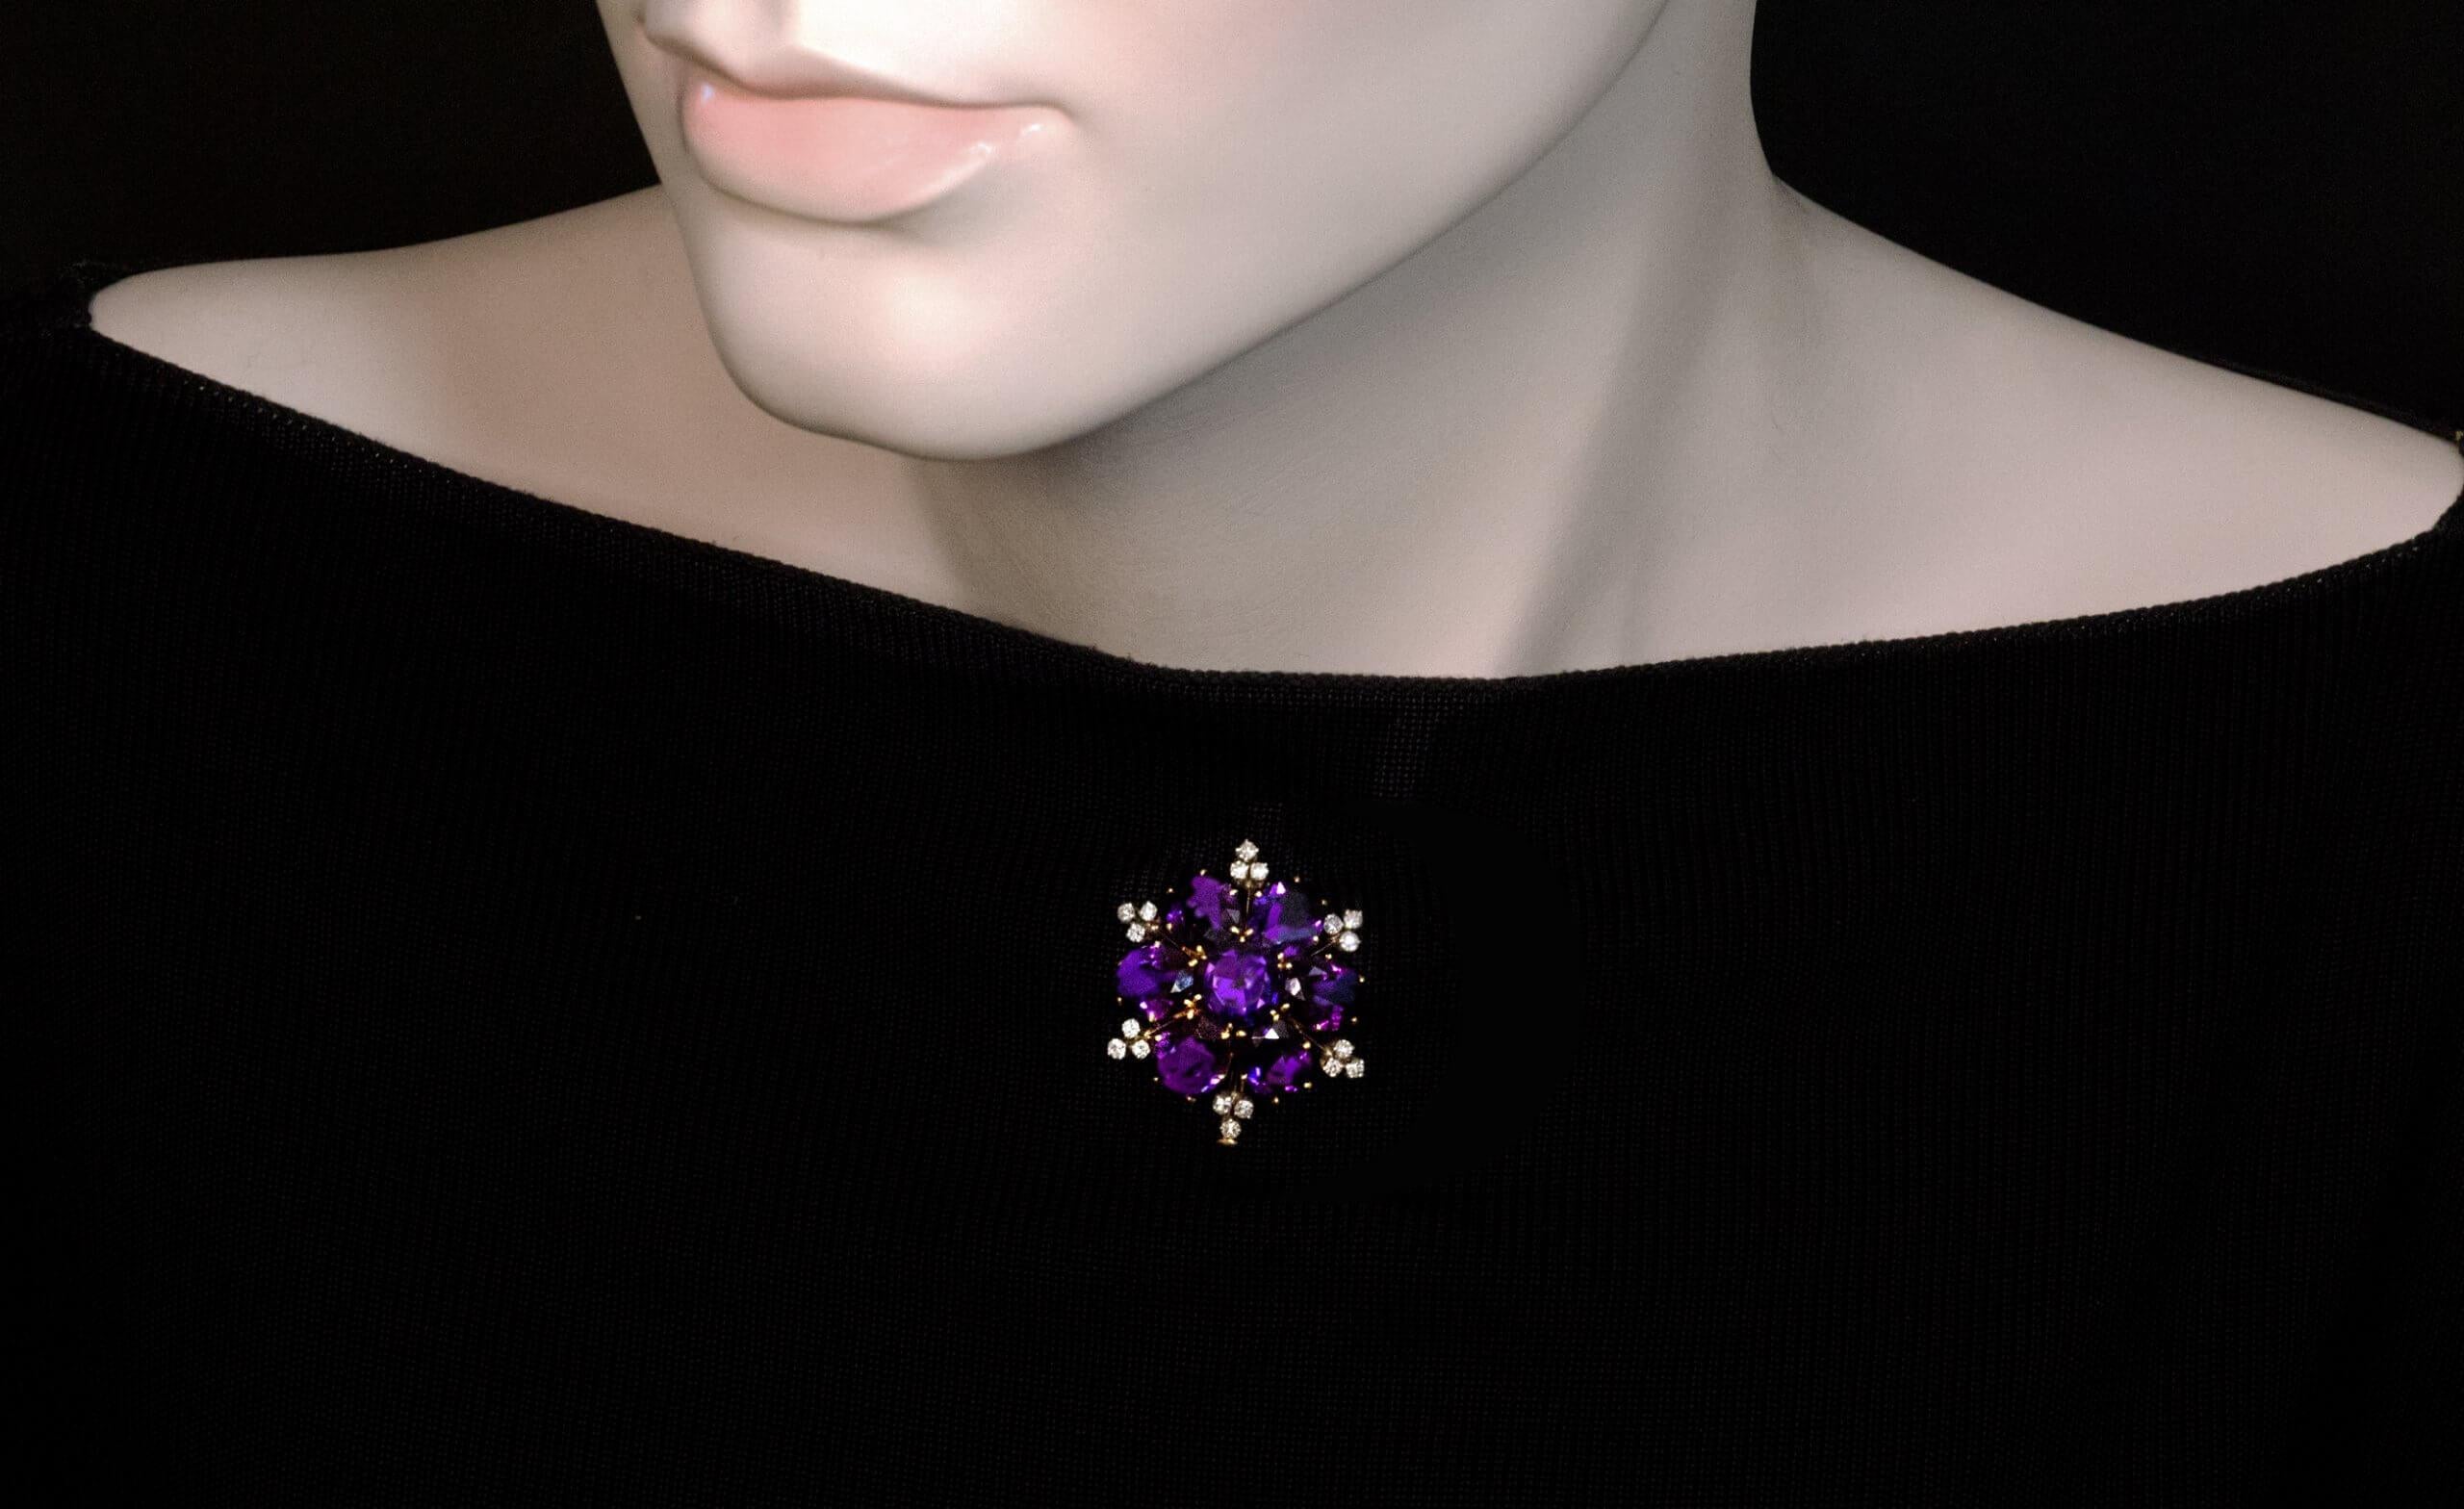 made in Vienna, Austria, circa 1925.
The brooch is designed as a stylized flower head. It is finely crafted in 18K yellow and white gold. The brooch features seven amethysts of excellent deep purple color accented by small single cut diamonds. The